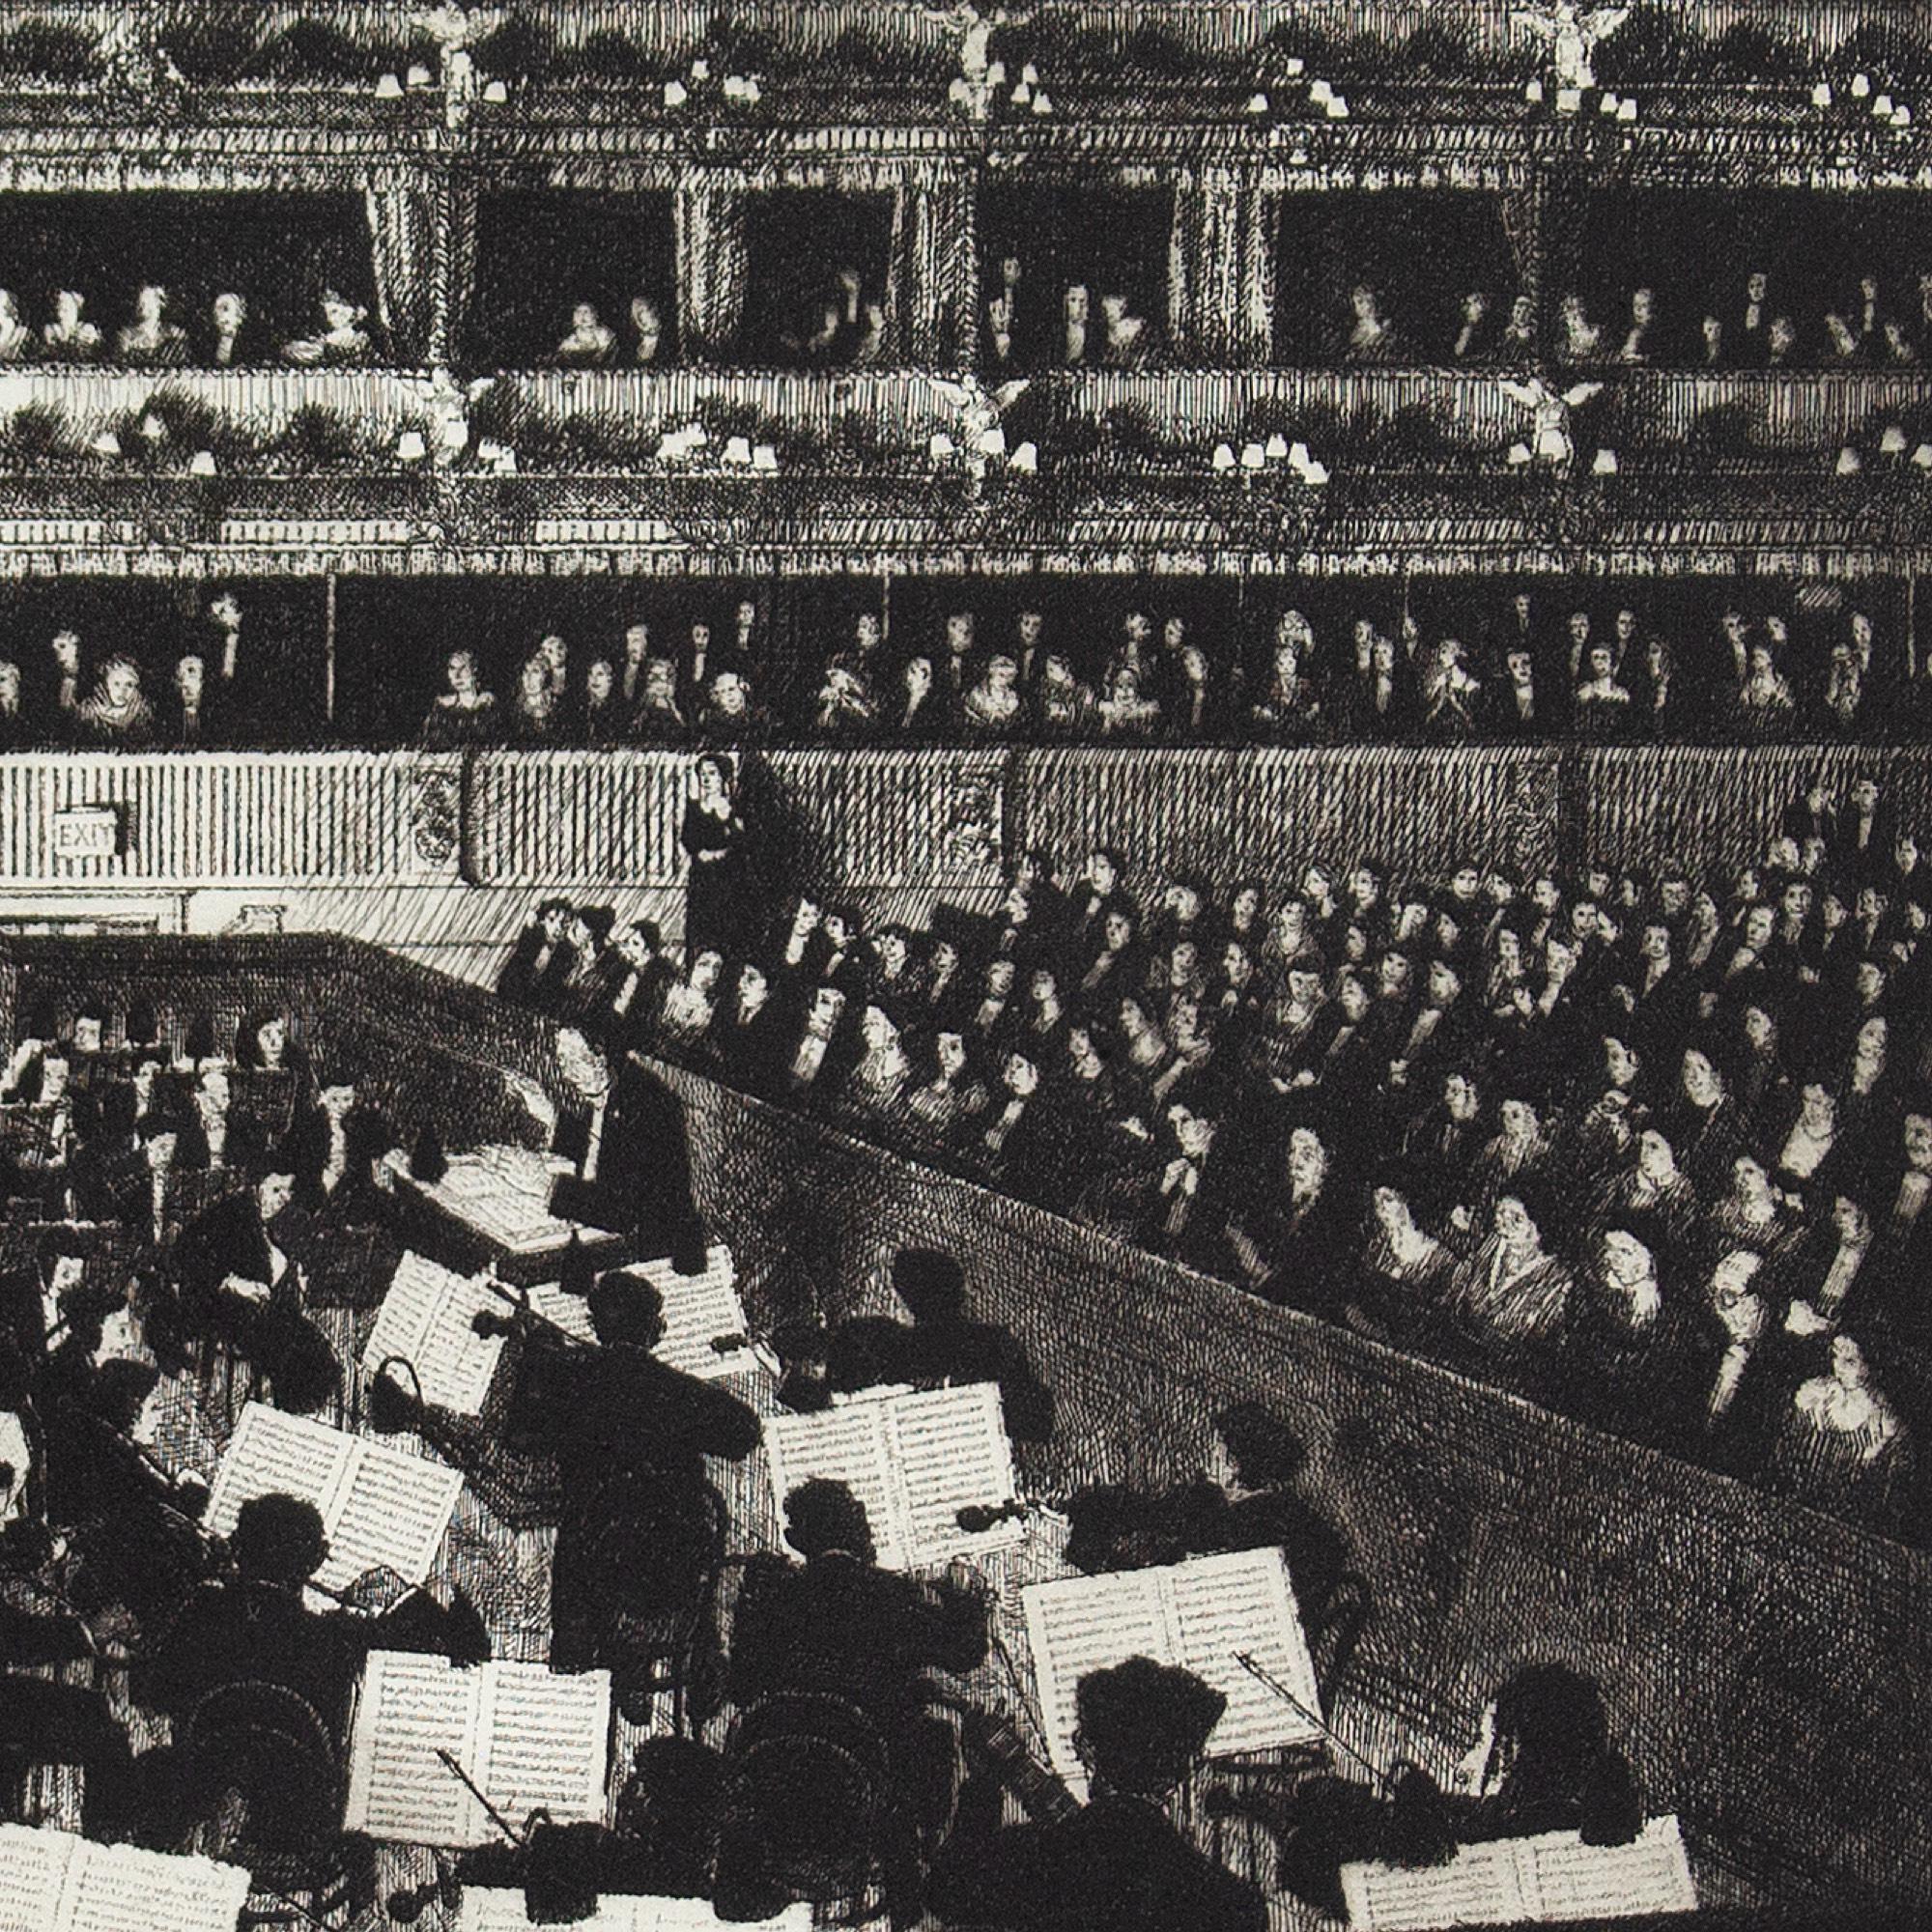 Wilfred Fairclough, Orchestra At The Royal Opera House, Etching 5